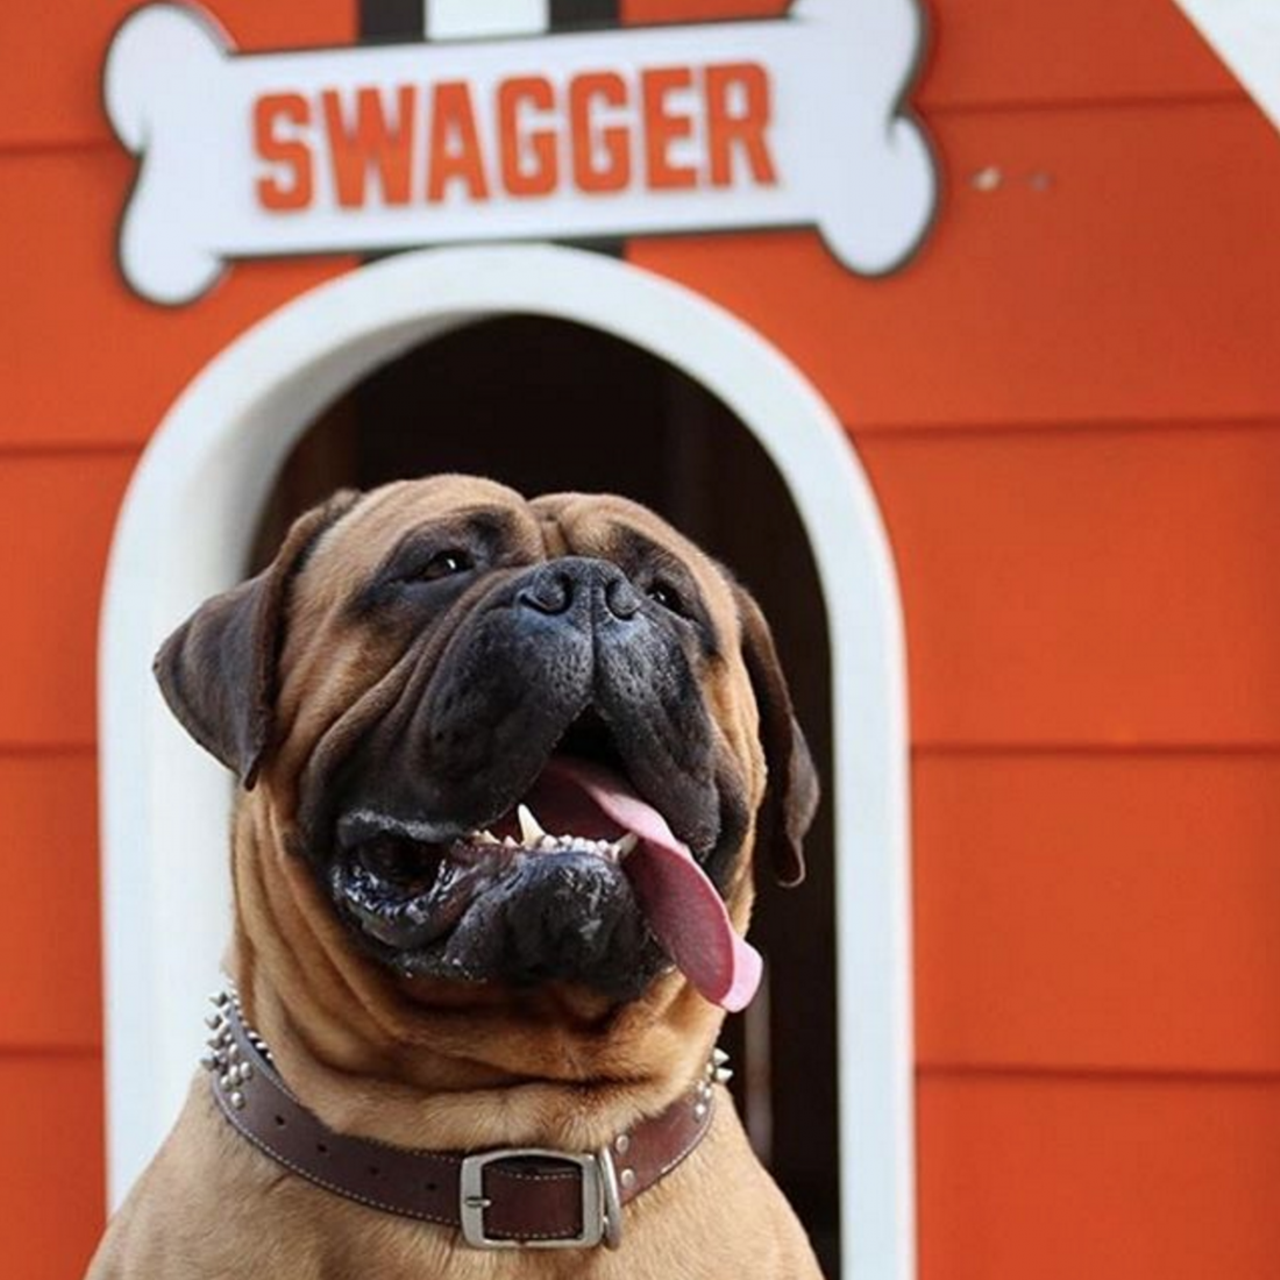 Dogs of Cleveland
This account features pups from all around the Cleveland area that Instagrammers shared with #dogsofcle. (Photo via @dogsofcle)